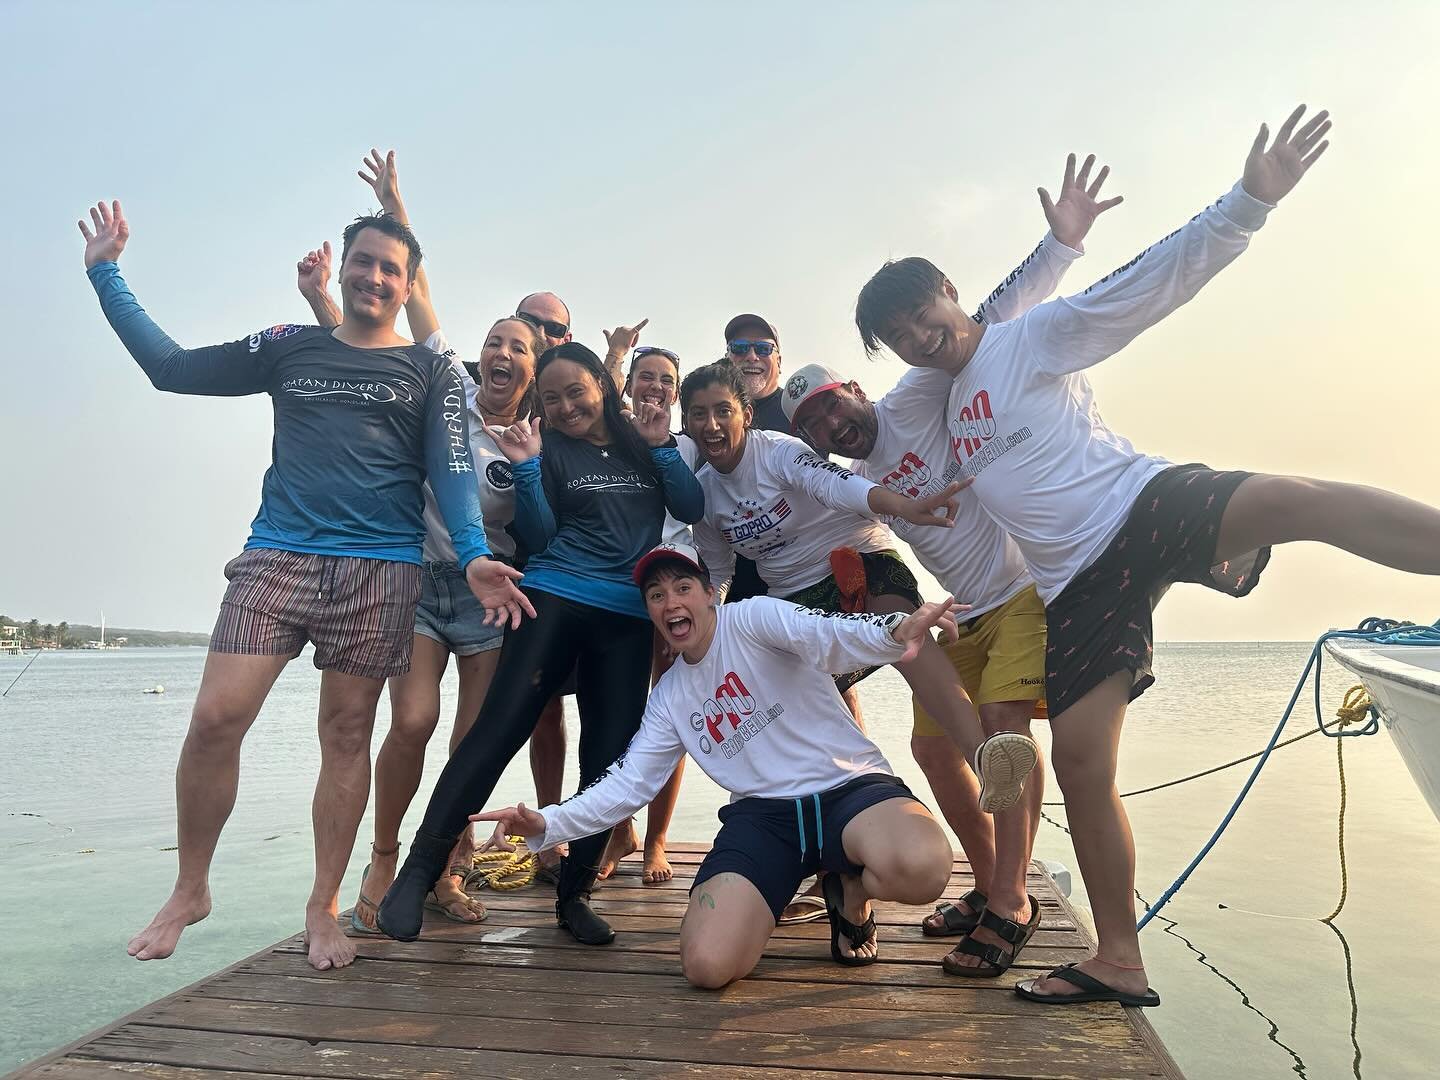 CONGRATS, NEW INSTRUCTORS! We are so proud to introduce you to our newest Roatan Divers IDC graduates, AKA new PADI Open Water Scuba Instructors!

Drop your well-wishes and best tips for @&zwnj;gemreyes_ and
@&zwnj;thejollywanderer as they start thei